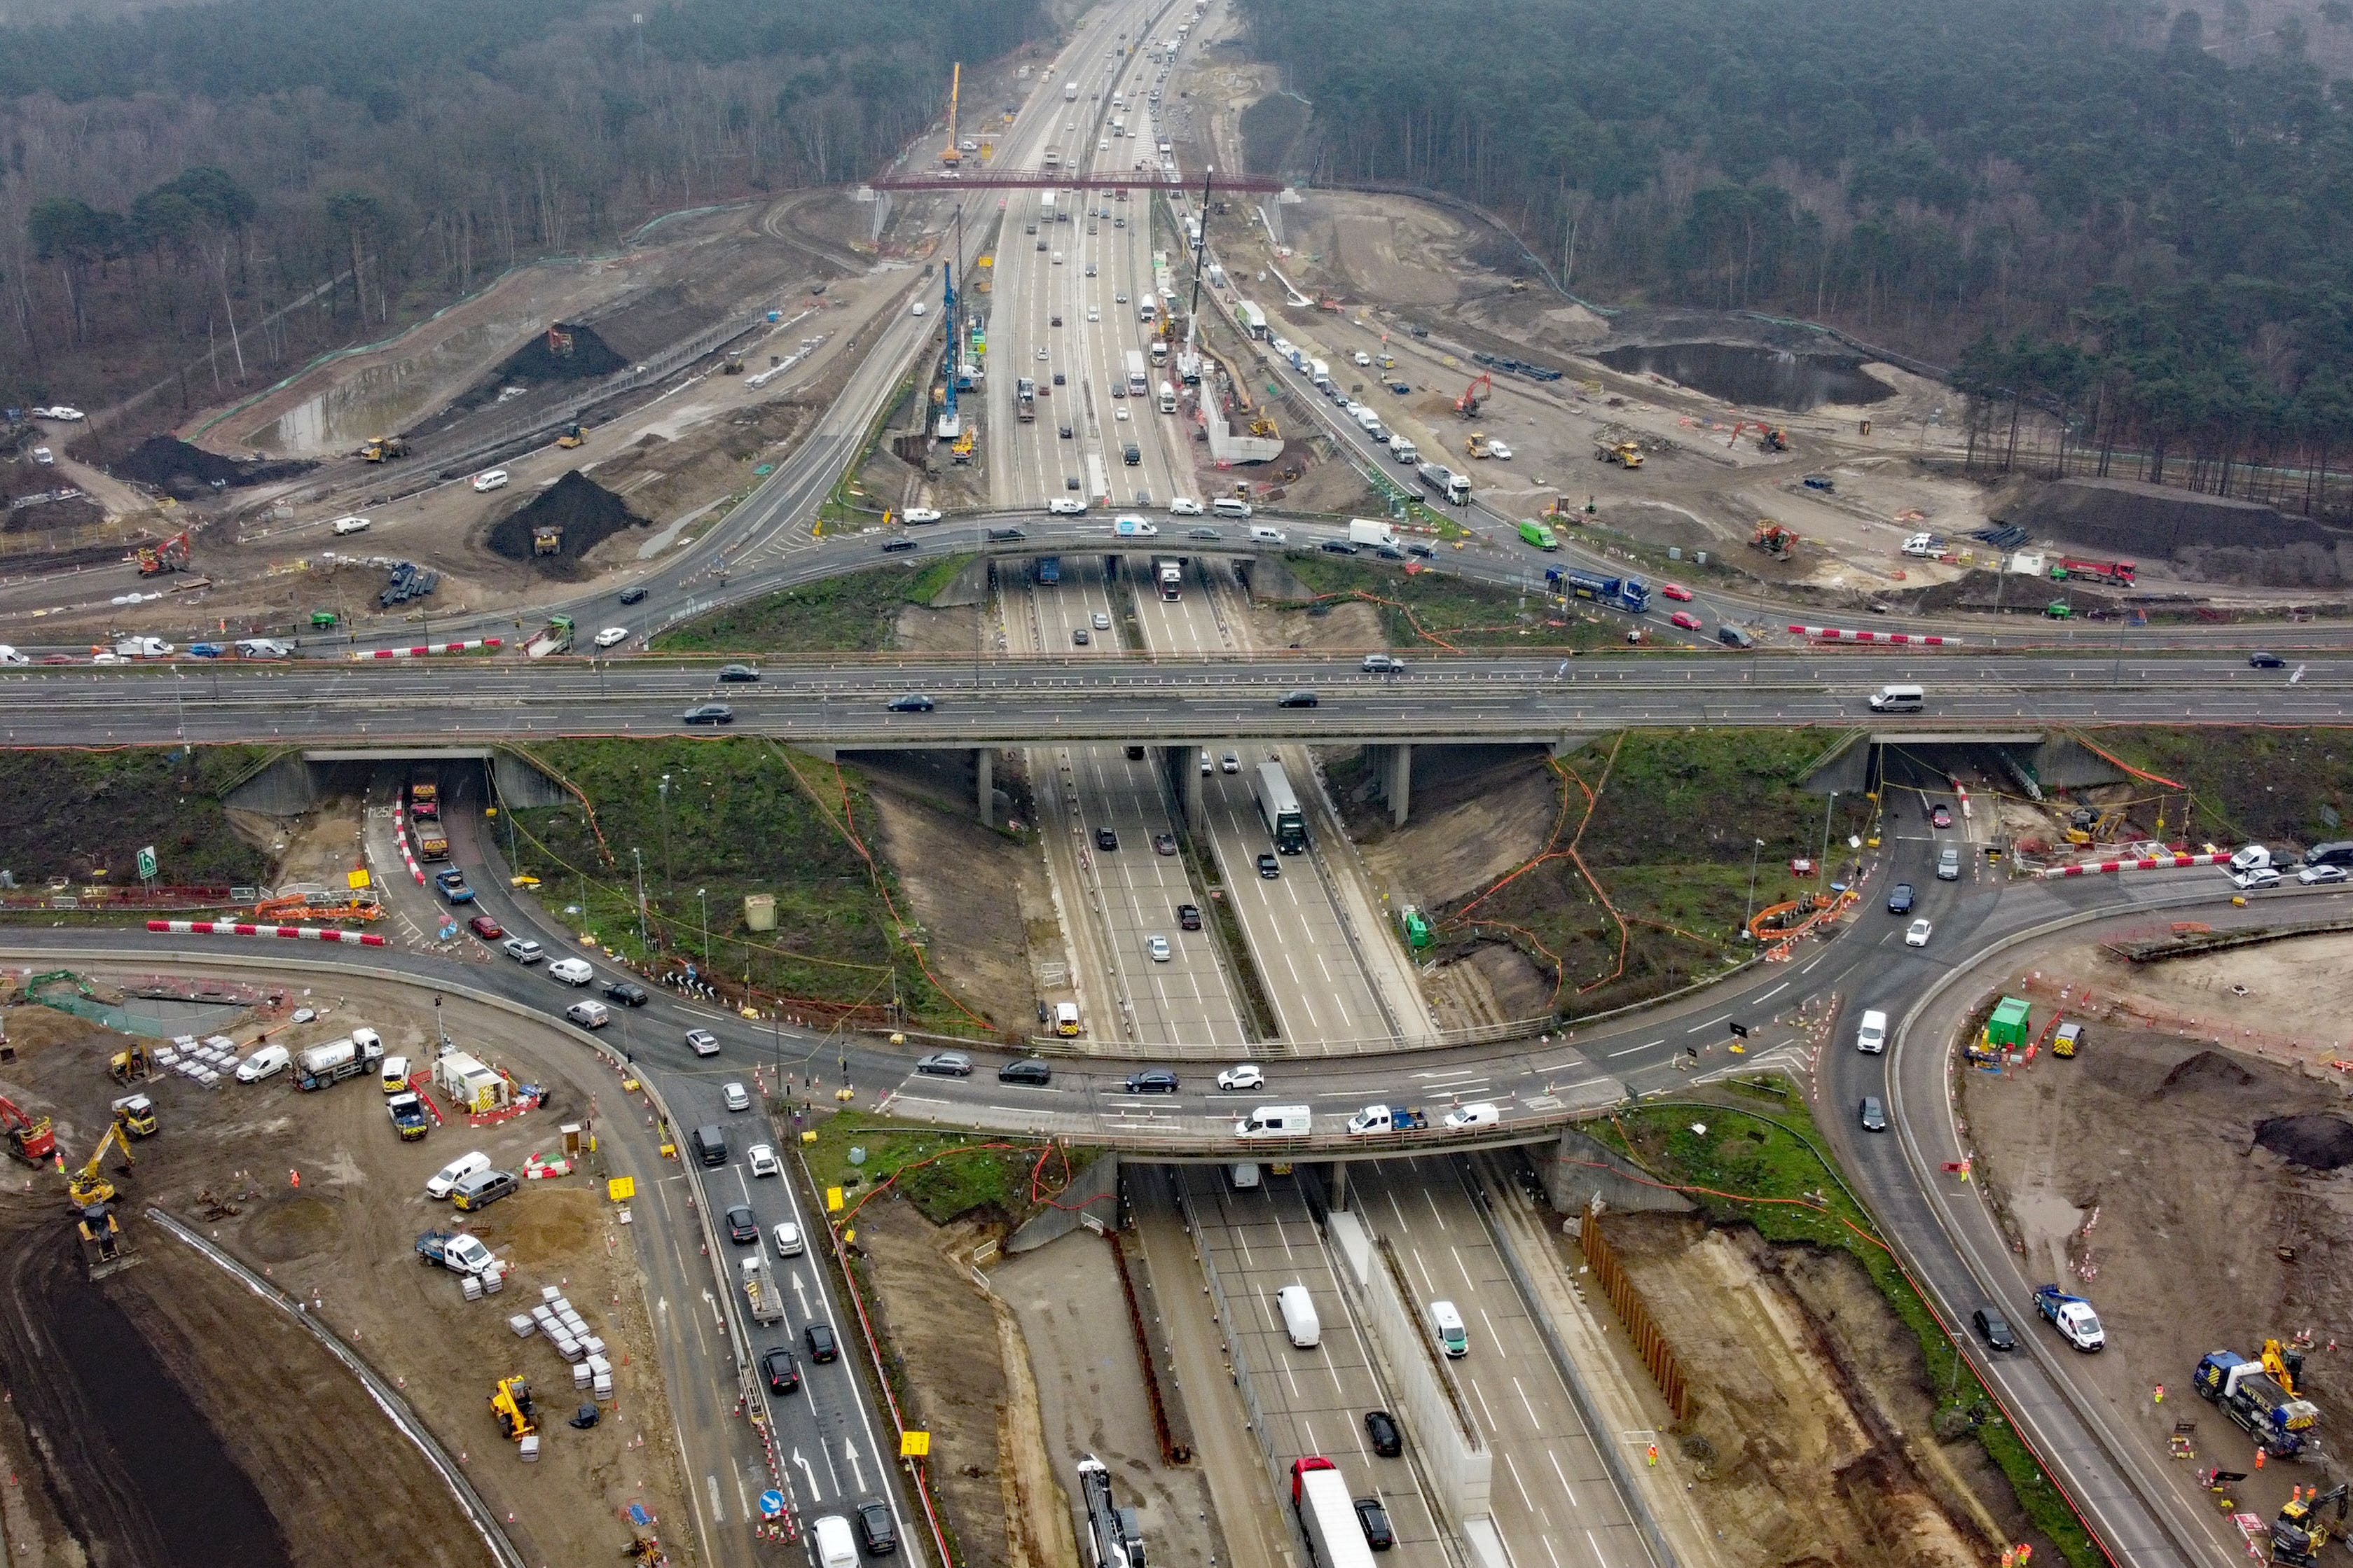 The motorway will be shut in both directions due to bridge work